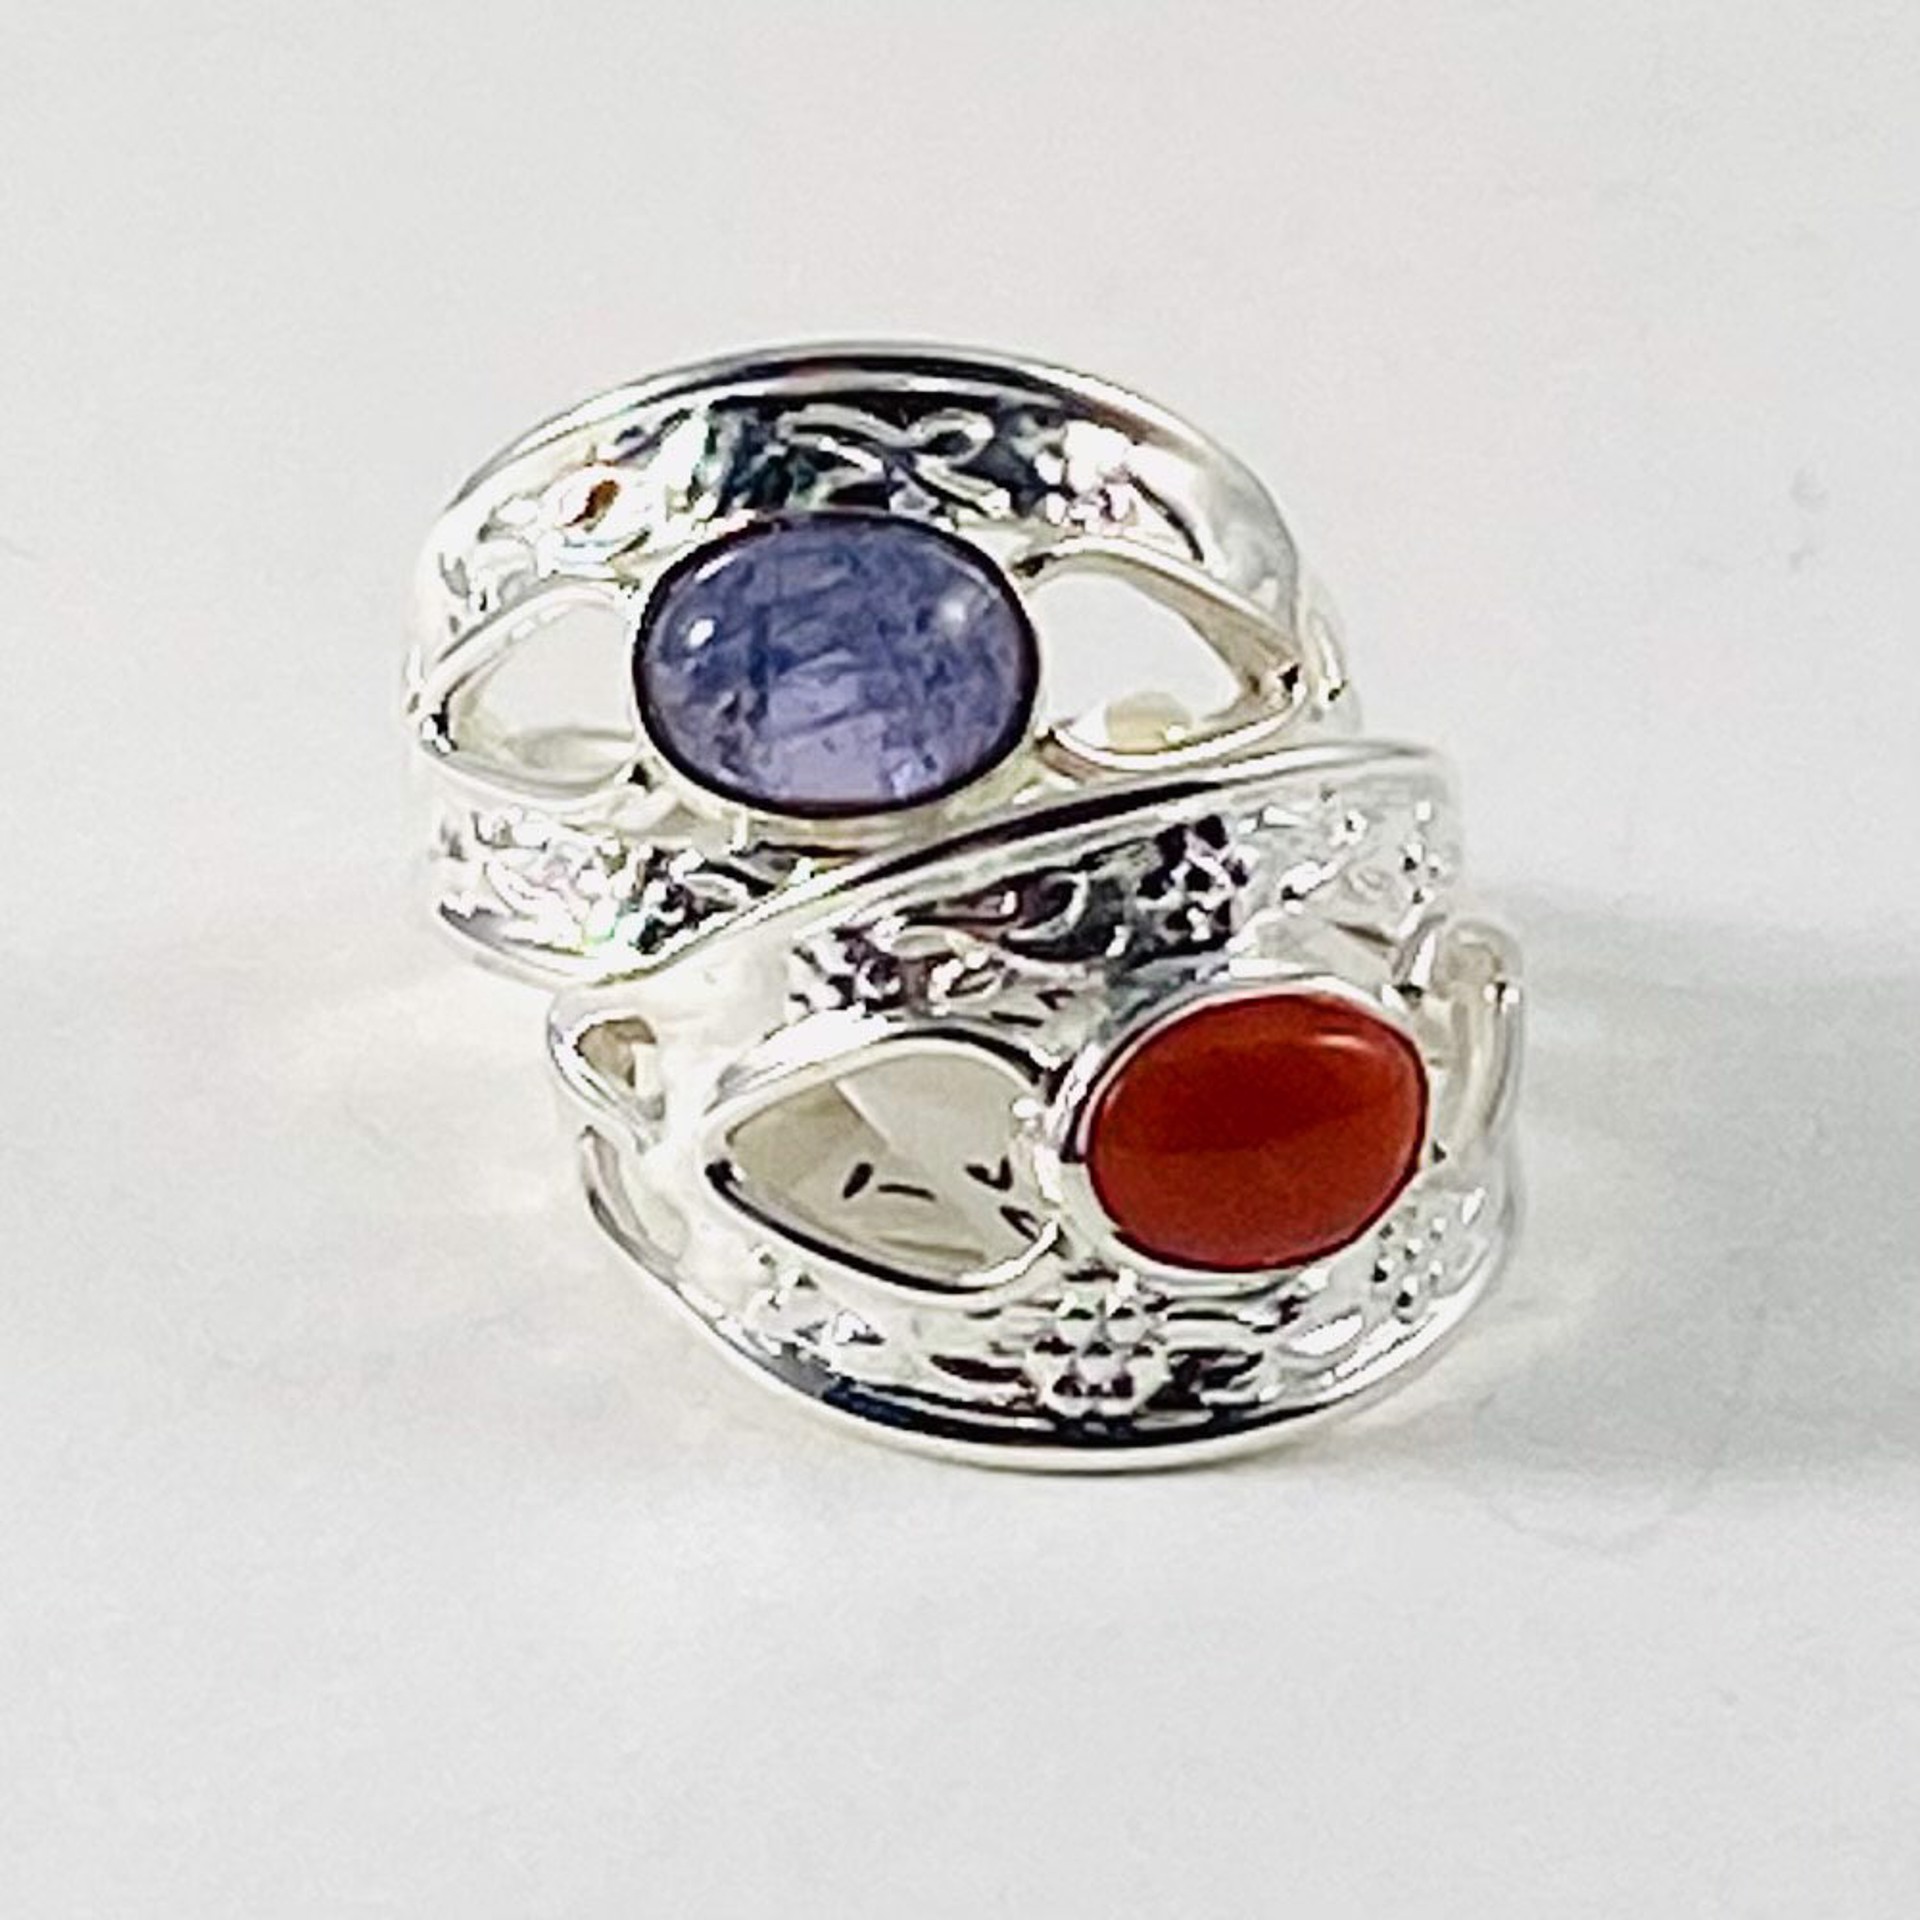 MON SR 3242 Tanzanite($82) or Coral($91) LIMITED SIZES by Monica Mehta